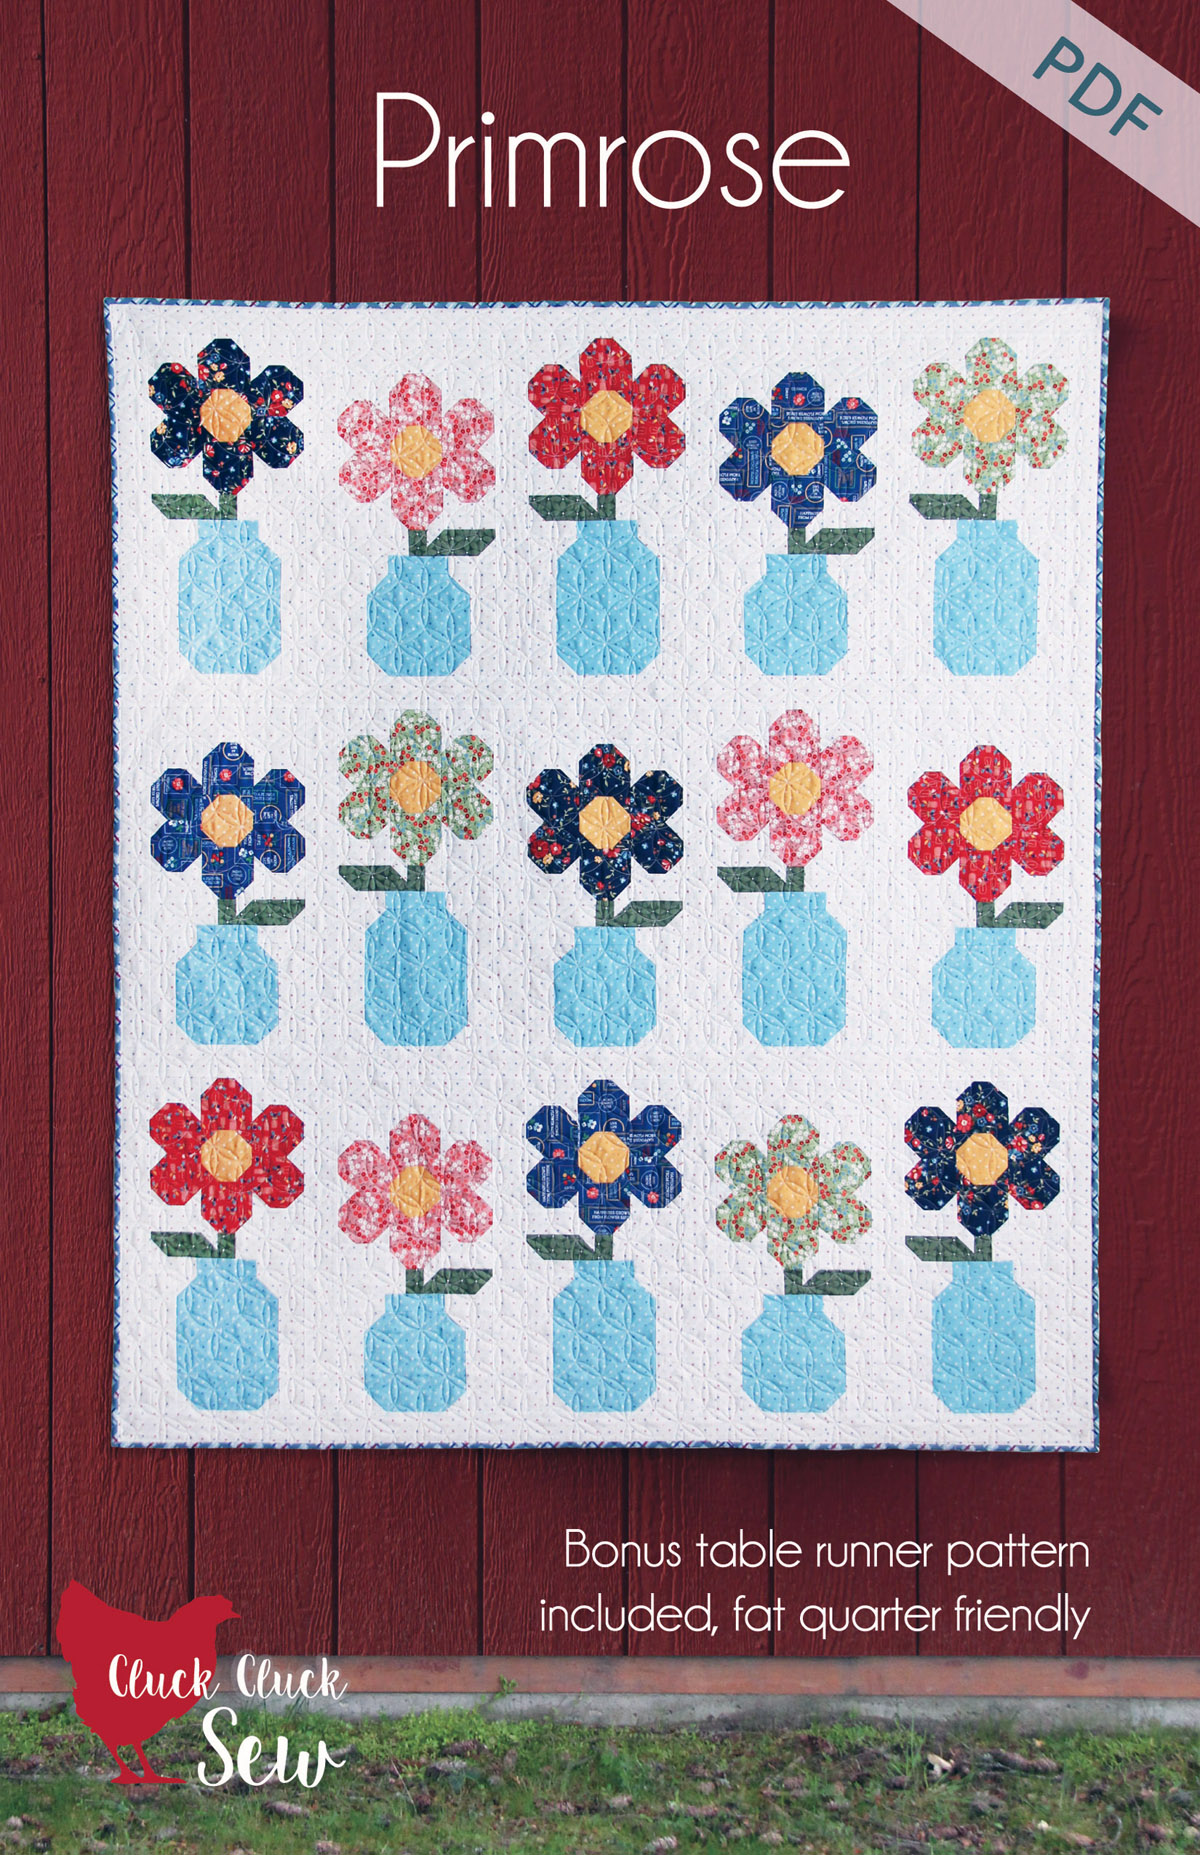 Primrose-PDF-quilt-sewing-pattern-Cluck-Cluck-Sew-front